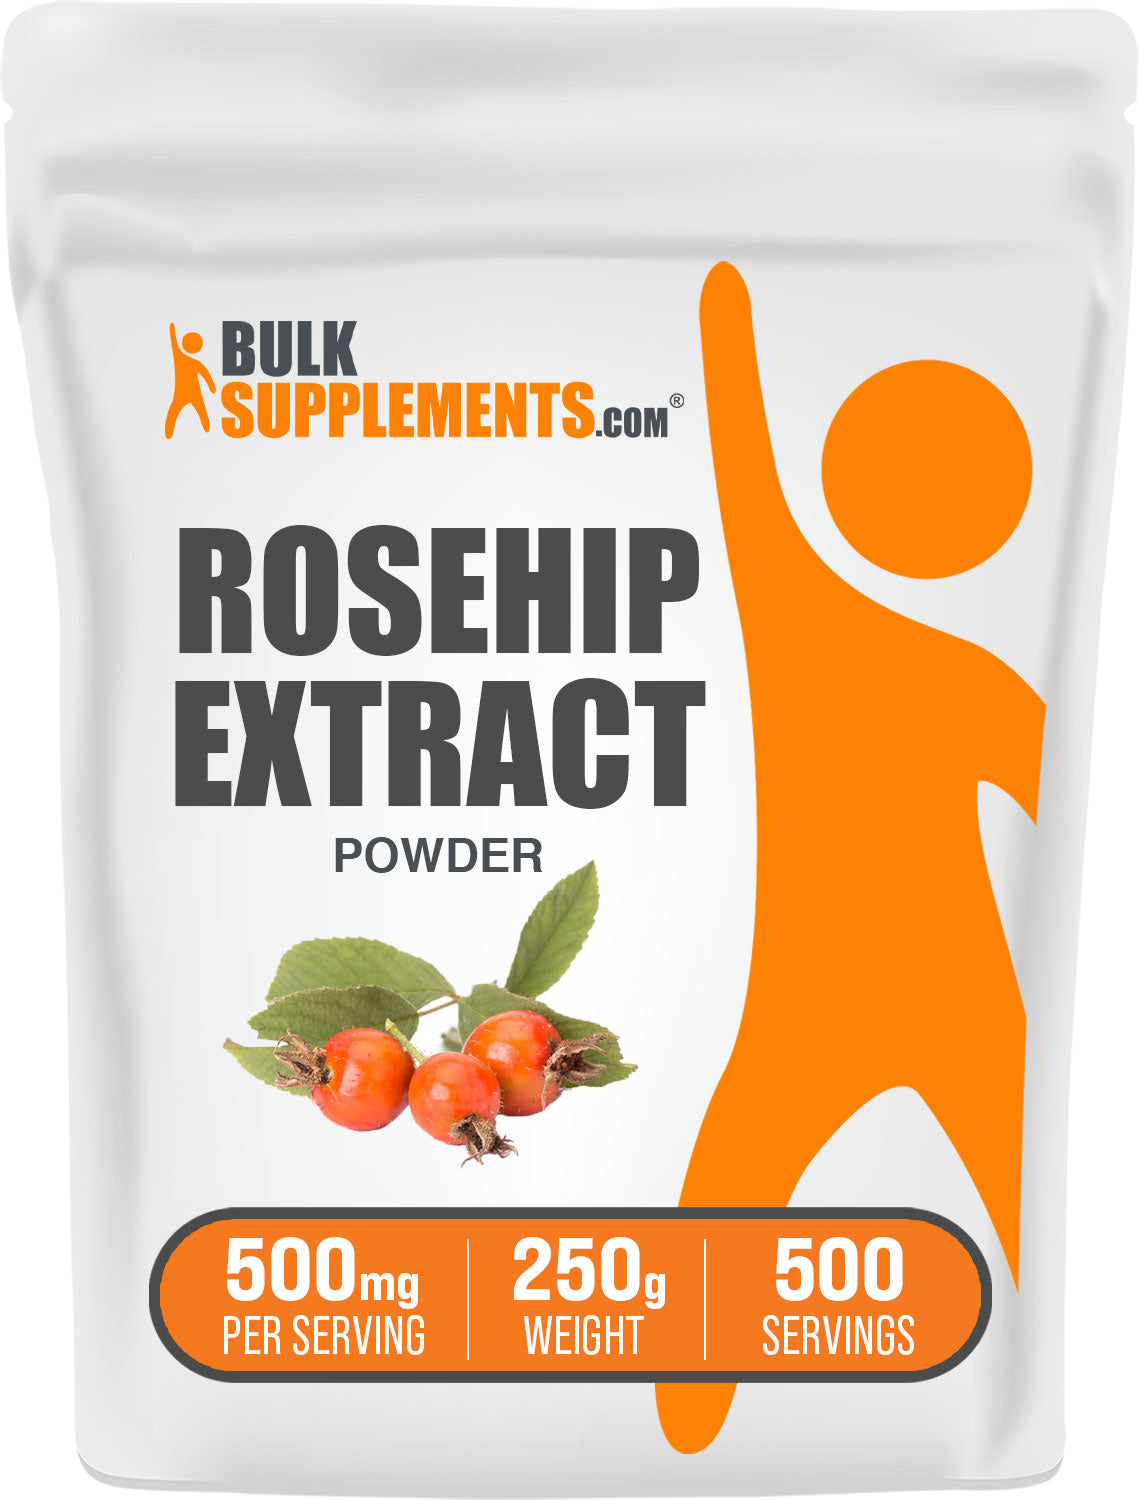 Rosehip Extract 250g Bag